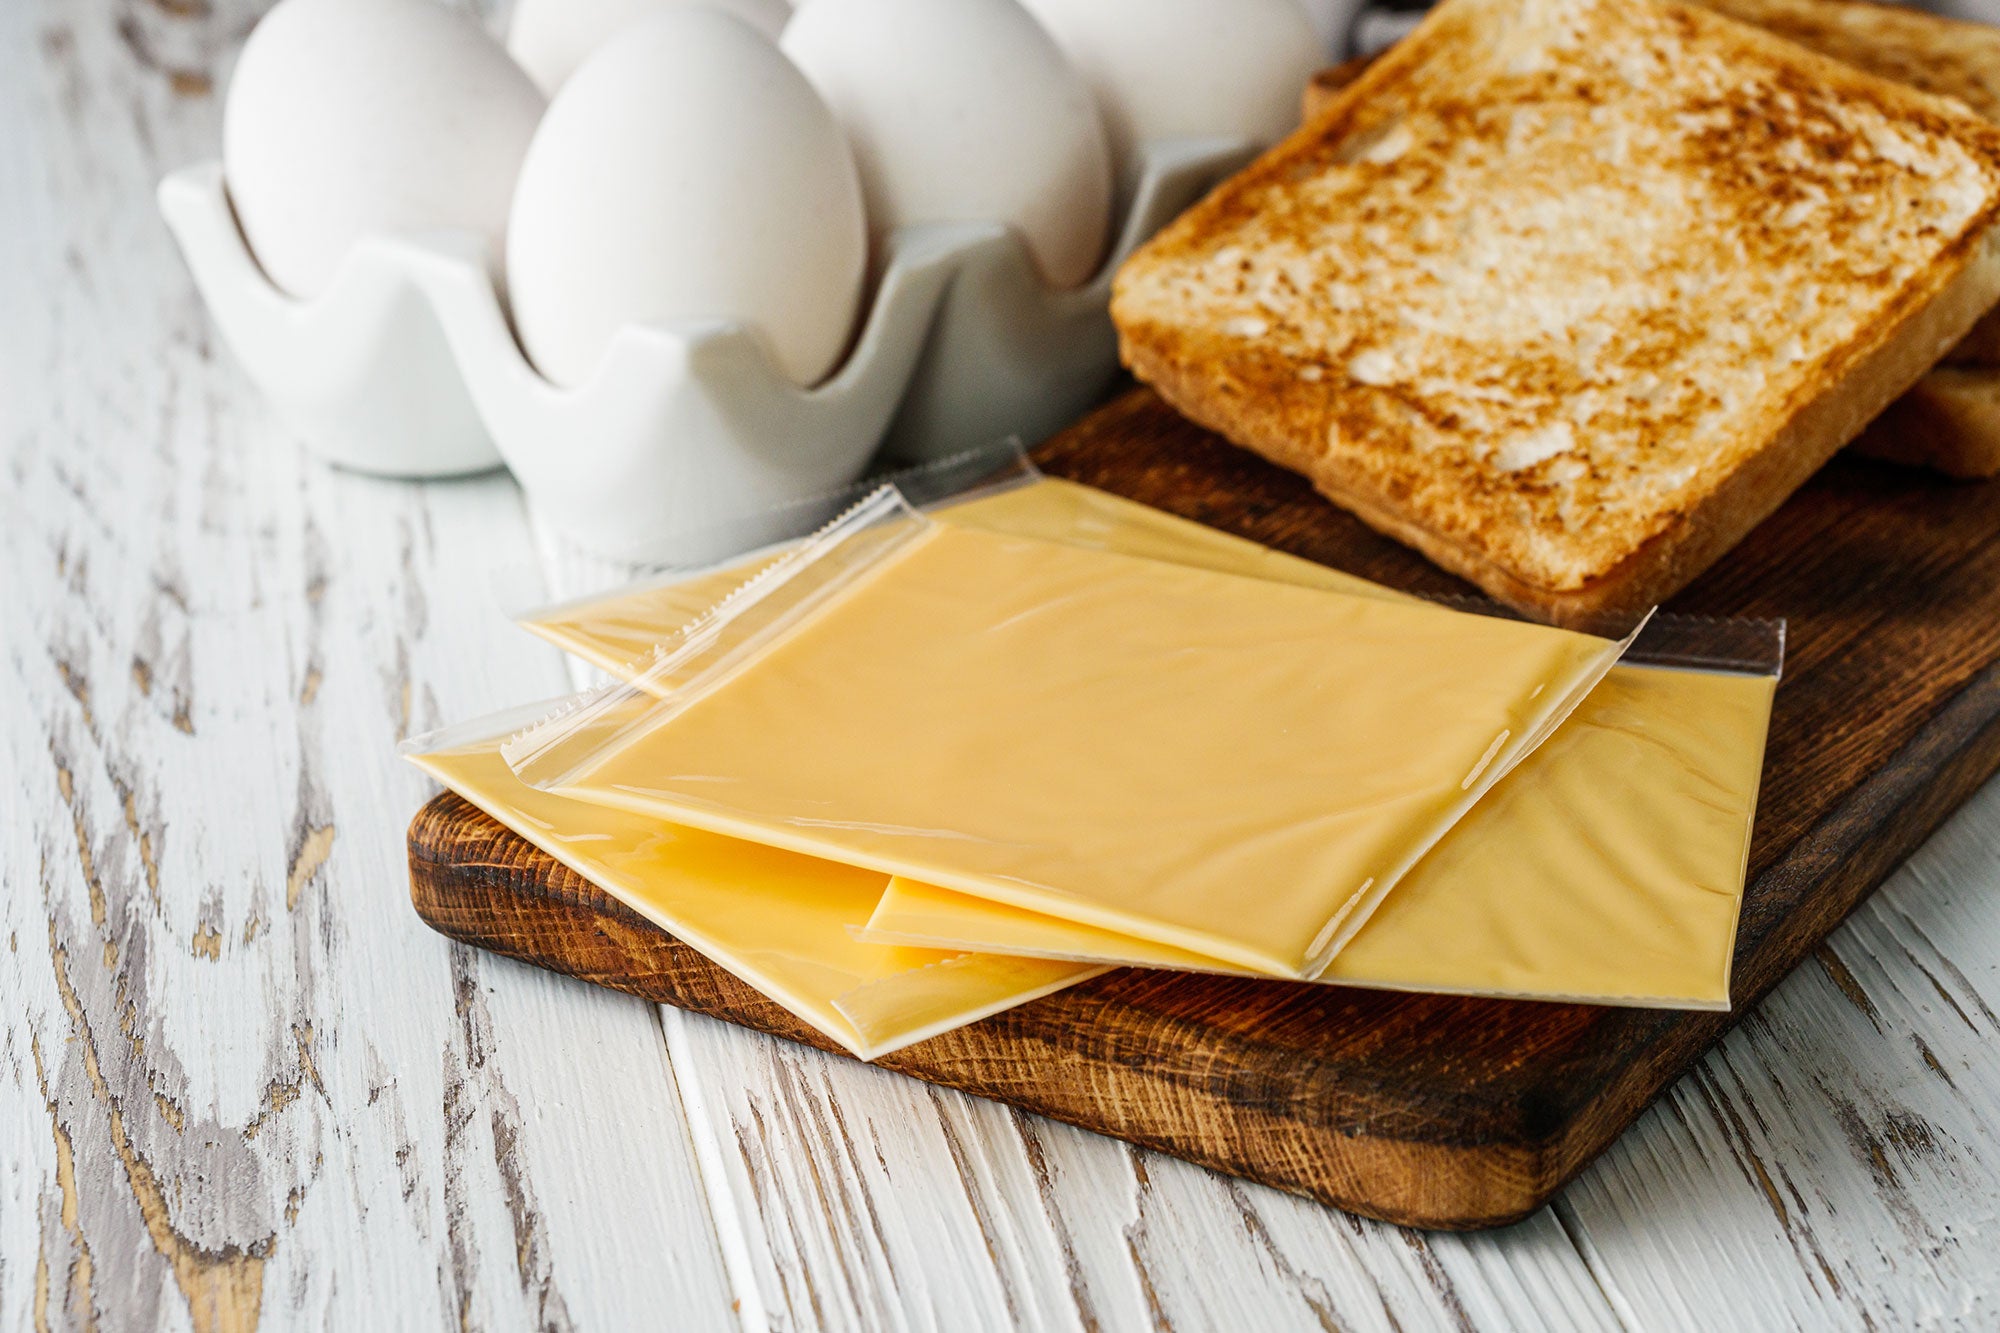 Sliced American cheese in plastic packaging are spread out on a wooden cutting board, next to toasted bread and white eggs in a ceramic egg-holder.